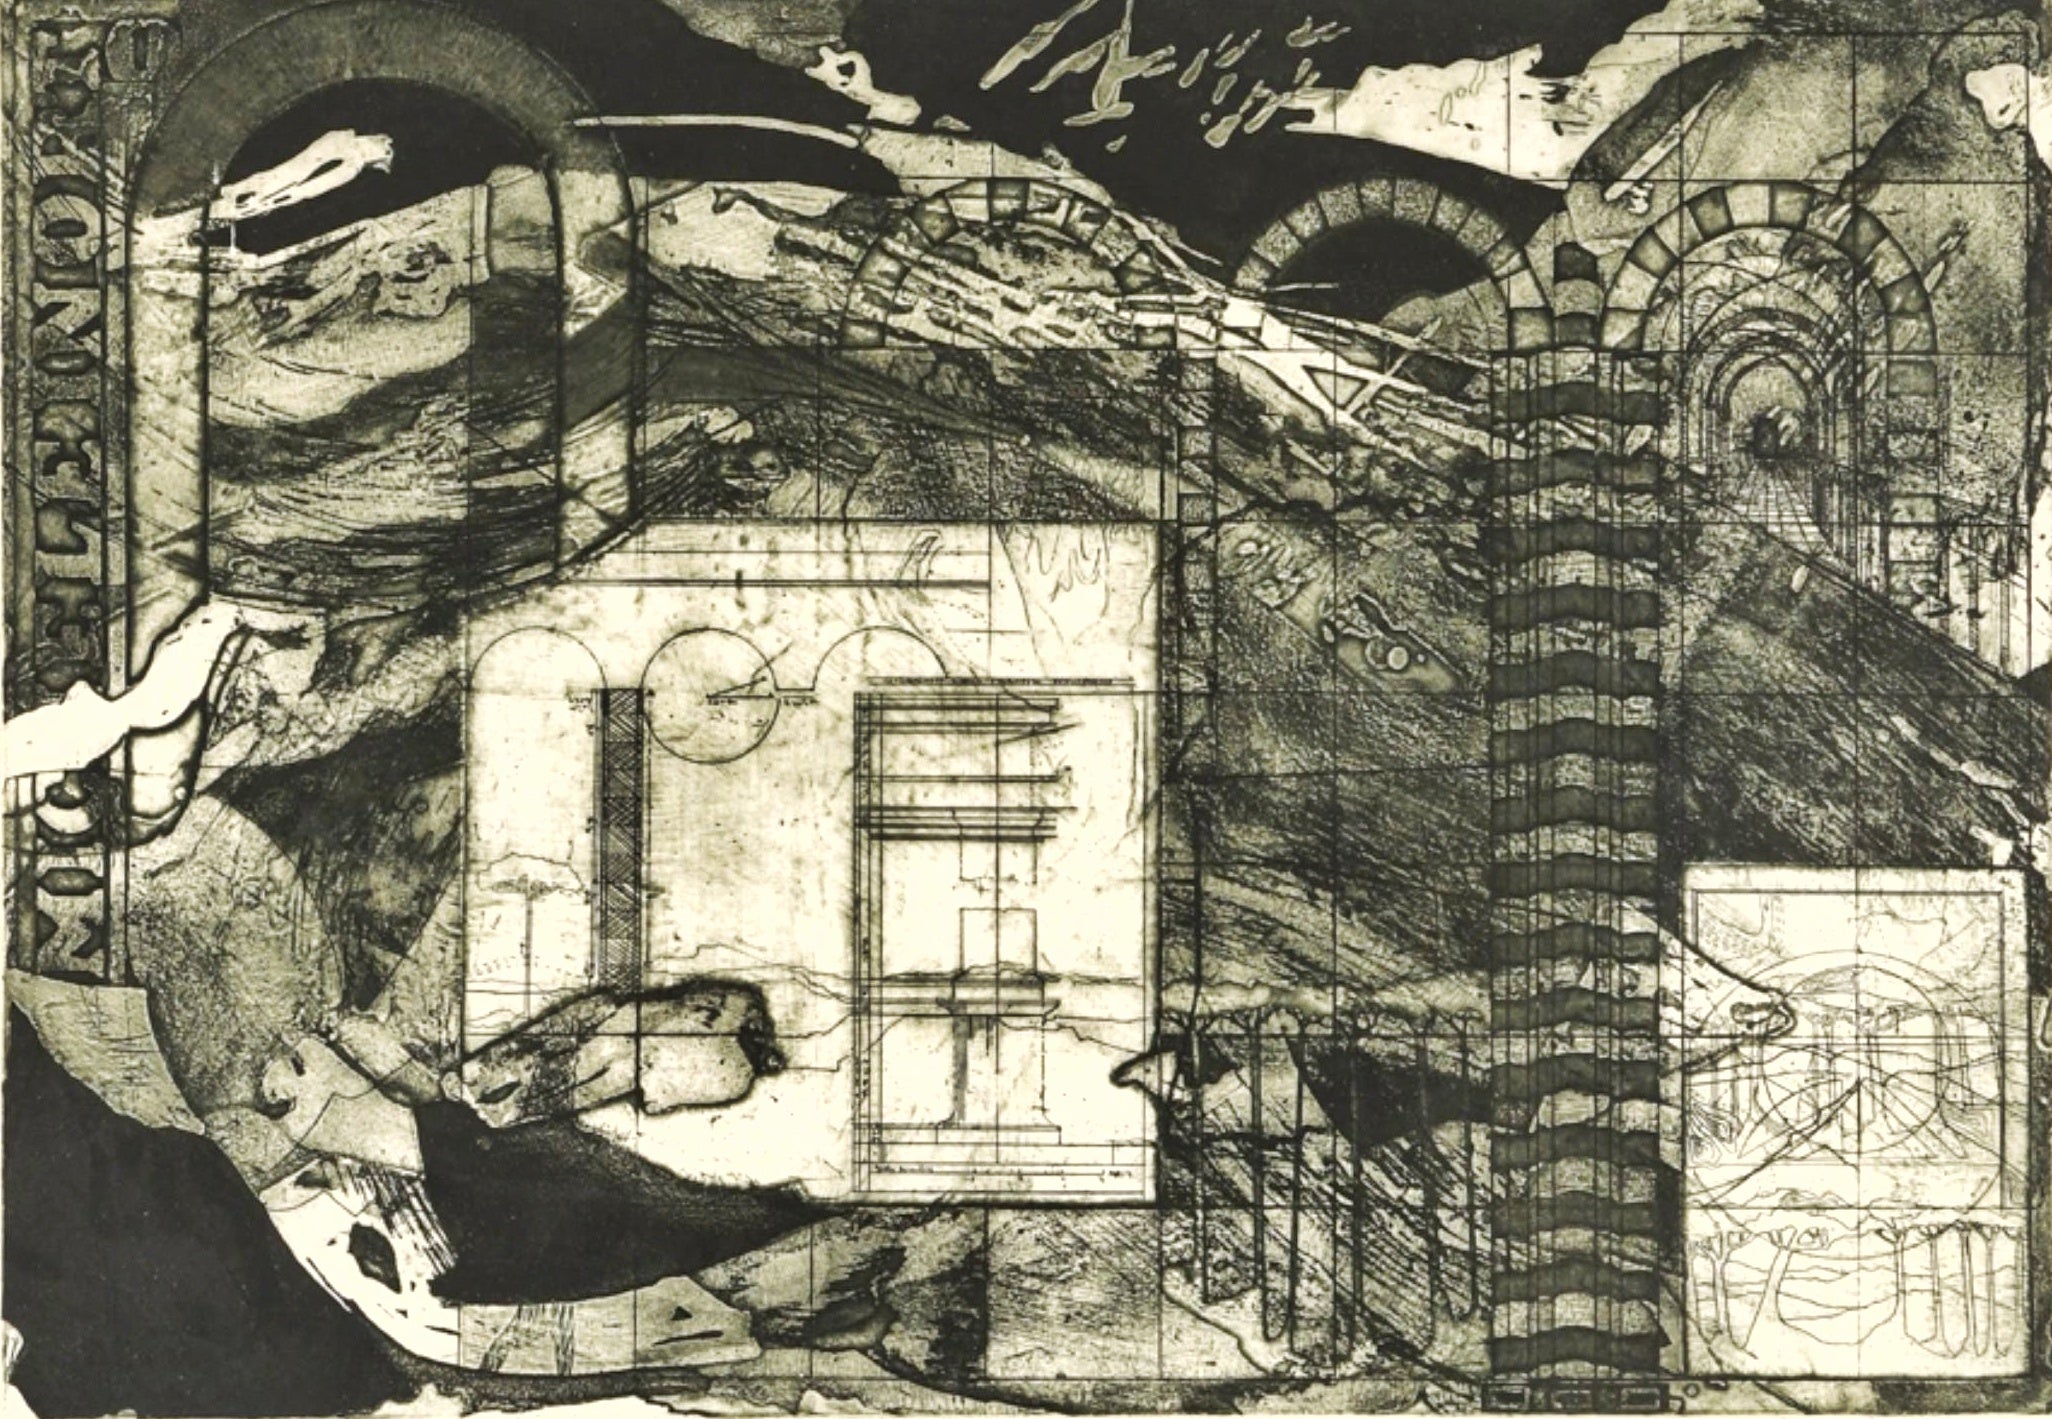 ‘MICHELE: FLOOD MEMORY AFFAIR’ LITHOGRAPH BY JOANNE PASCHALL (1970s)